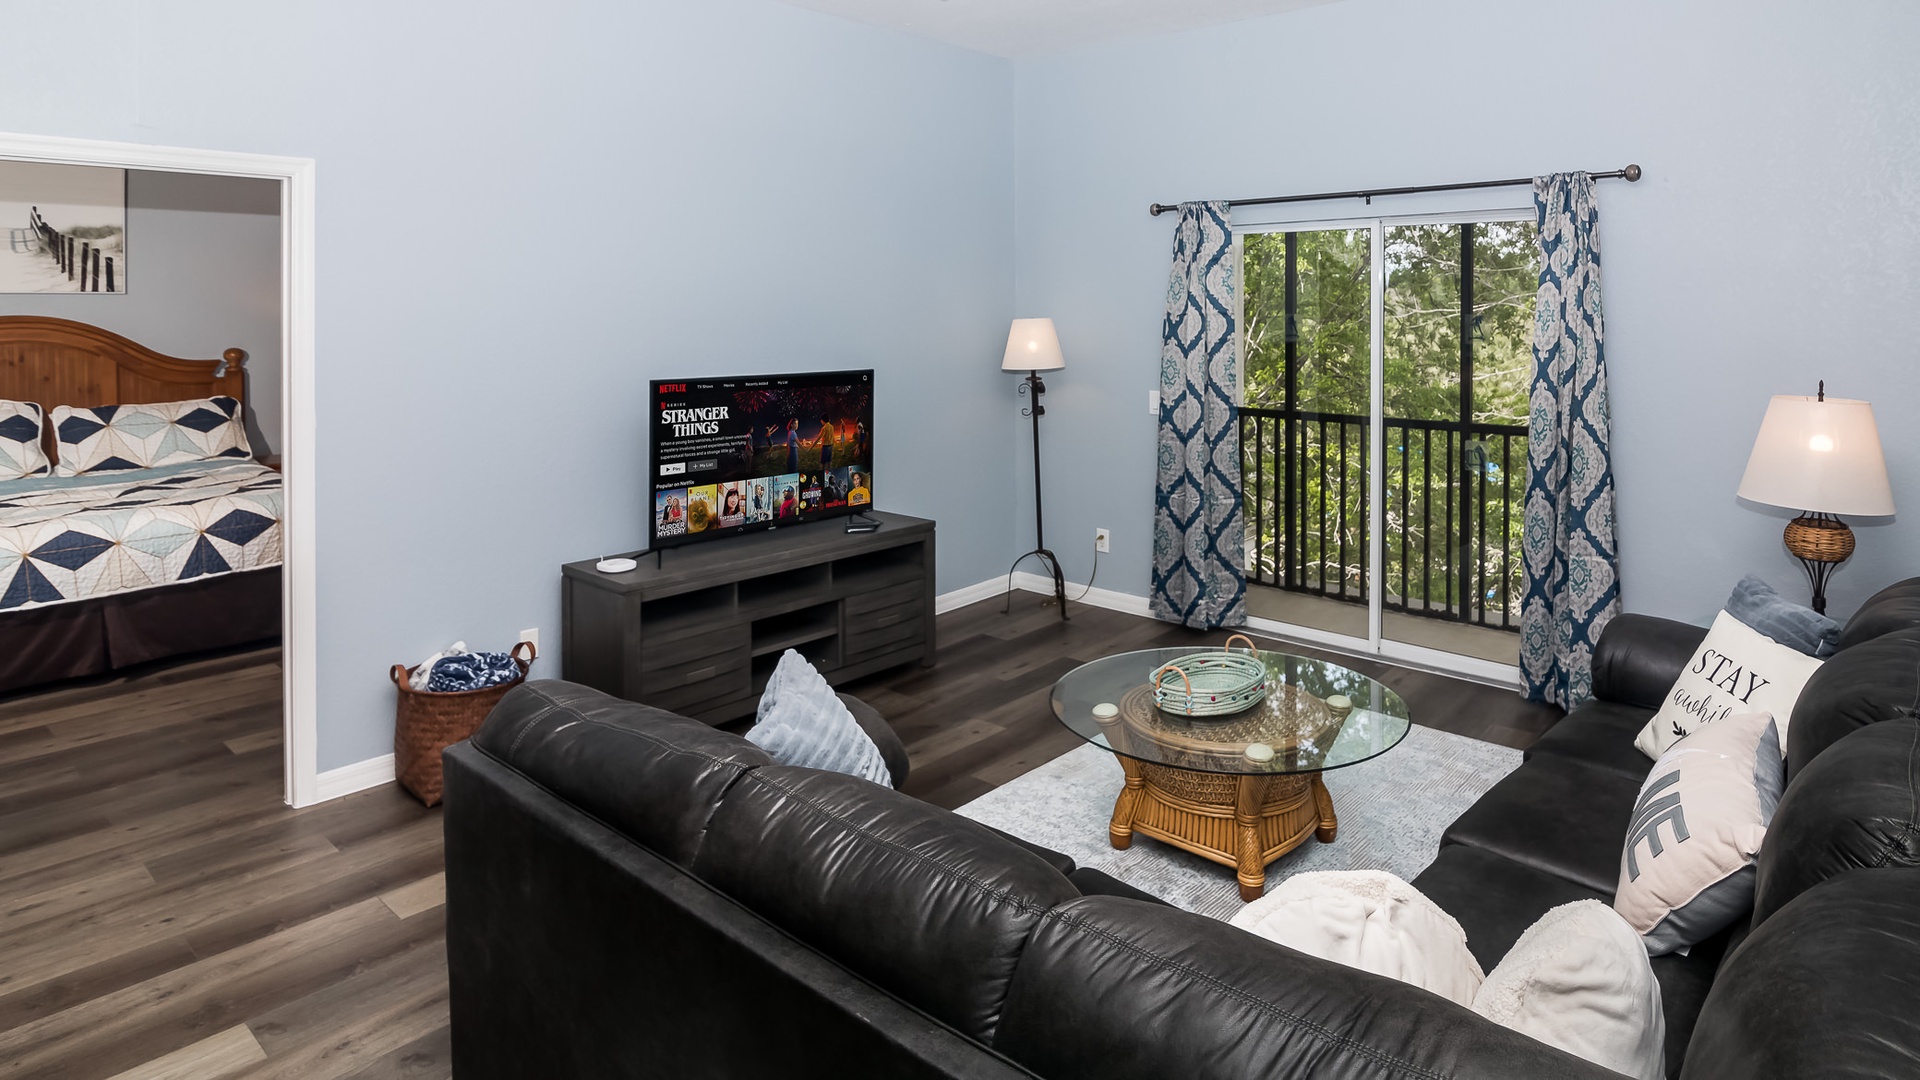 Open living space with Smart TV, board games, and screened balcony access